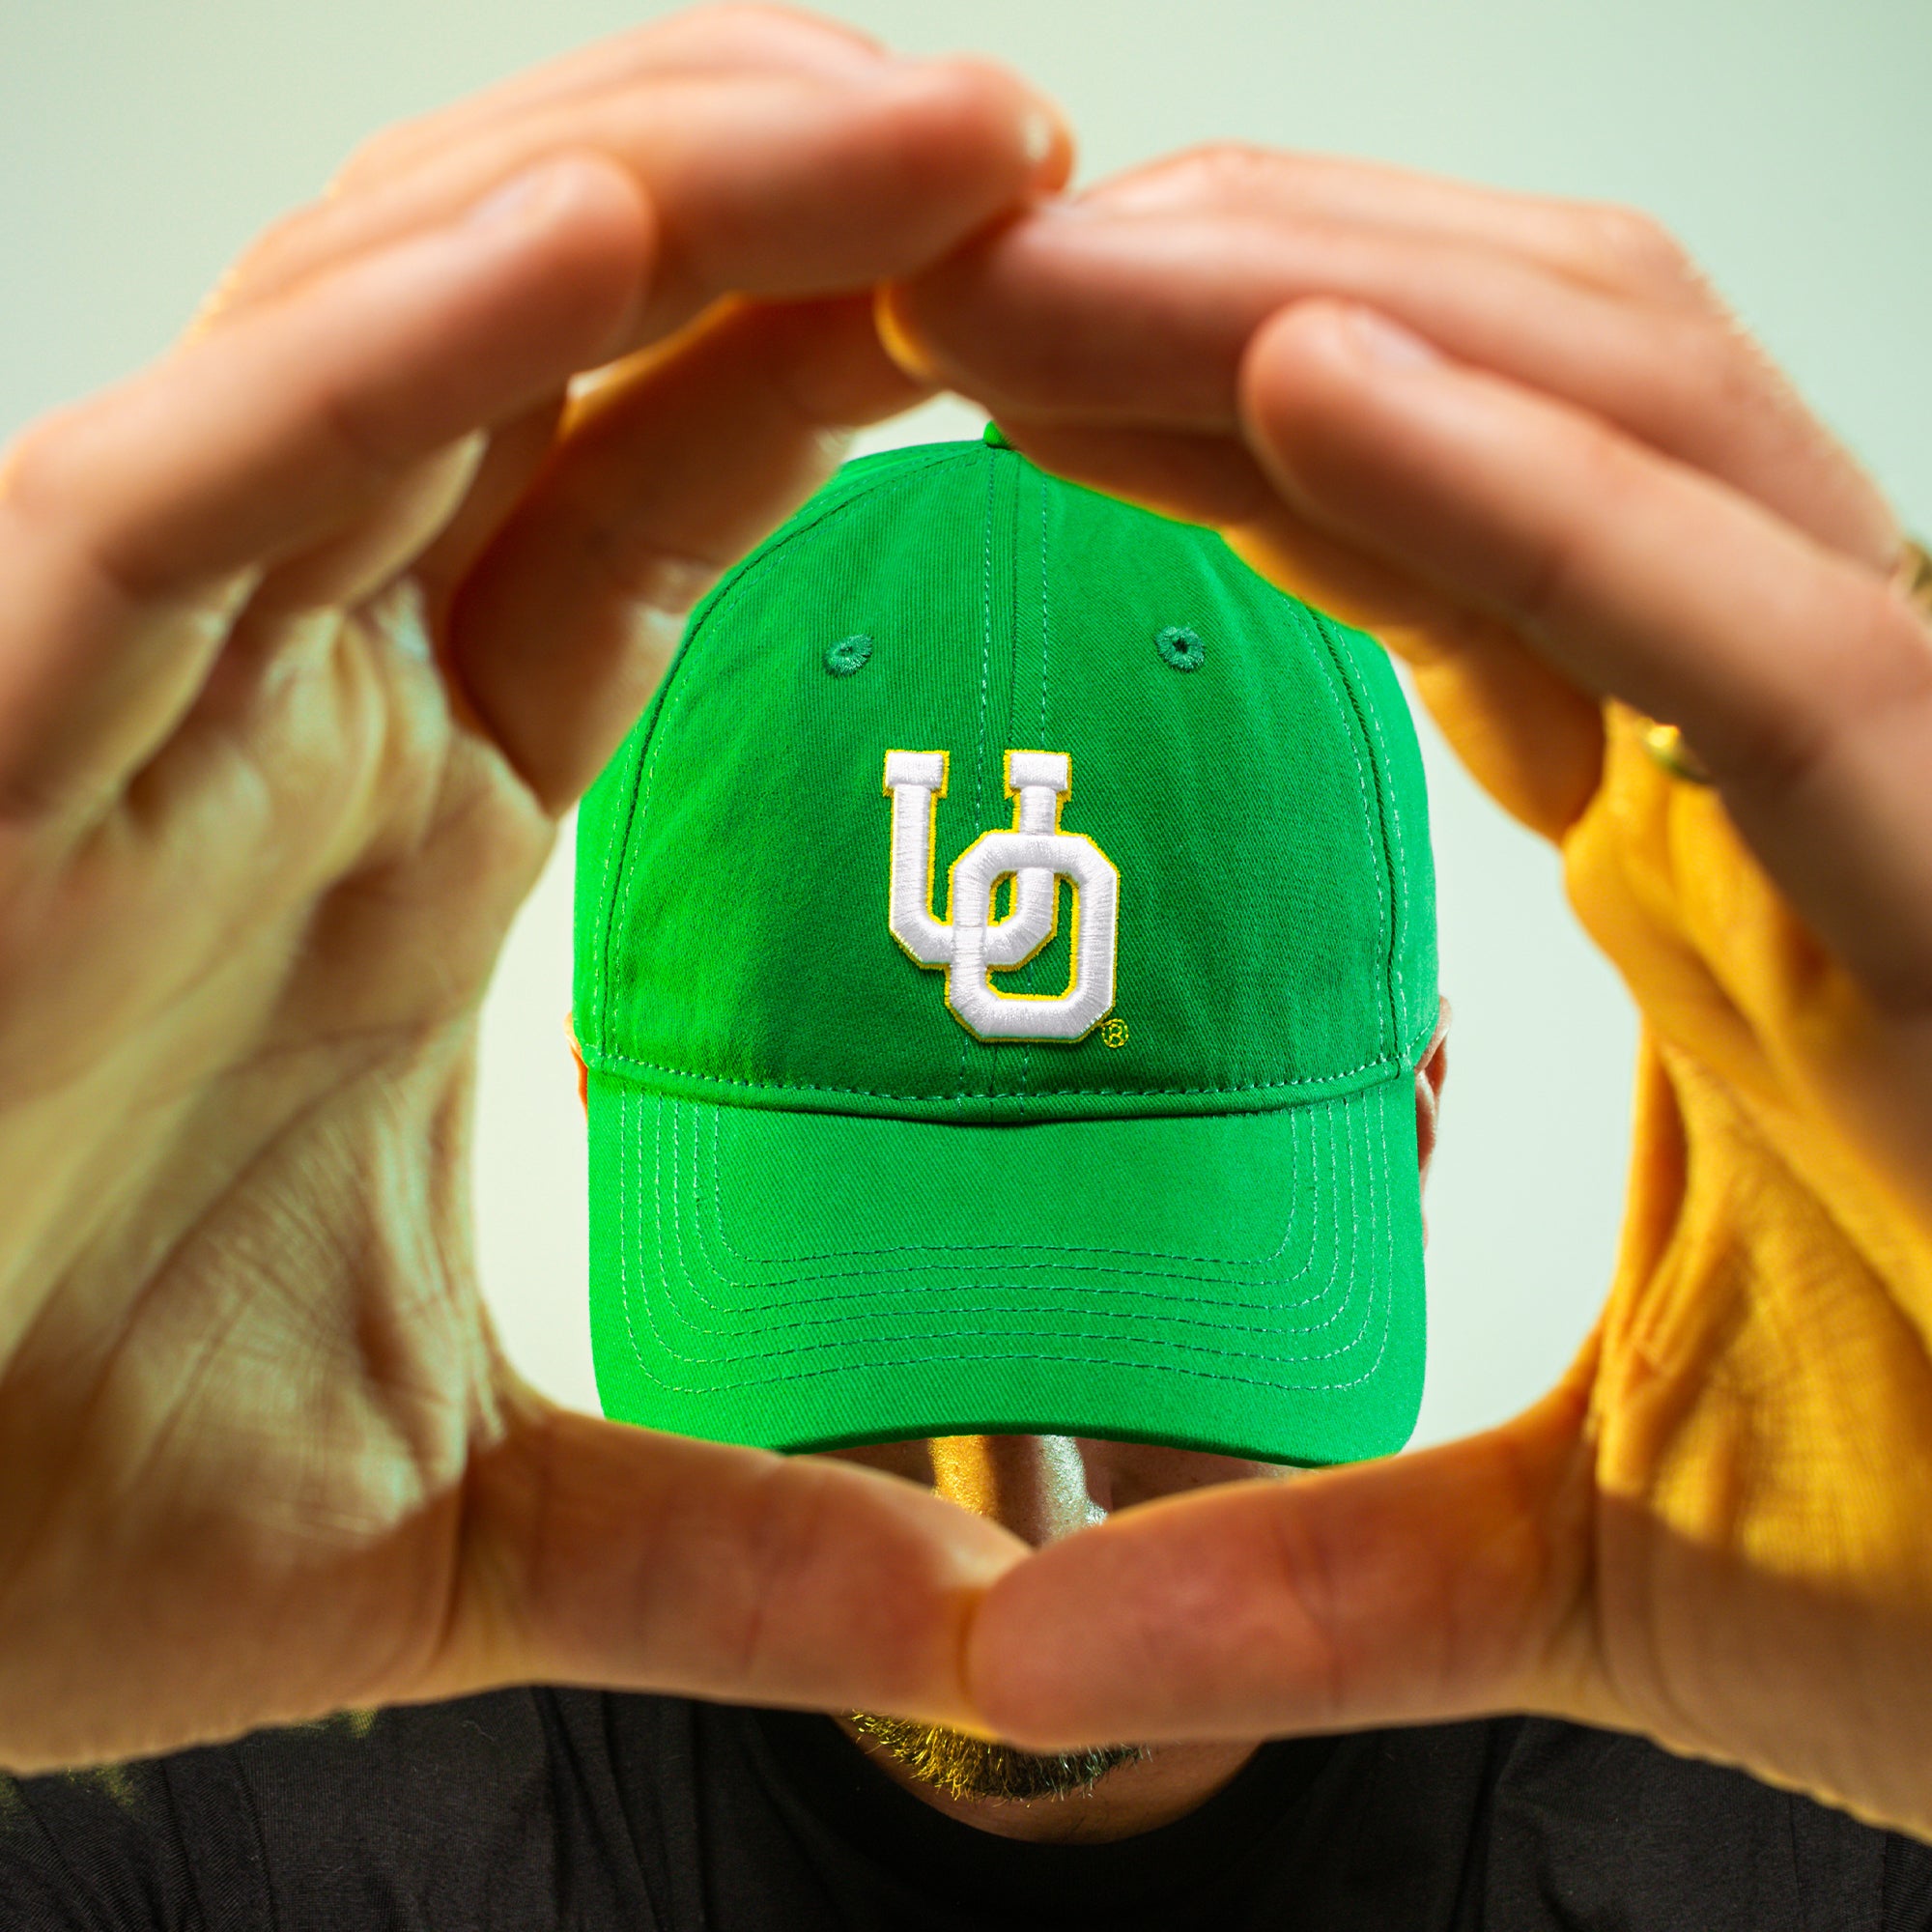 UO Dad Hat - Green